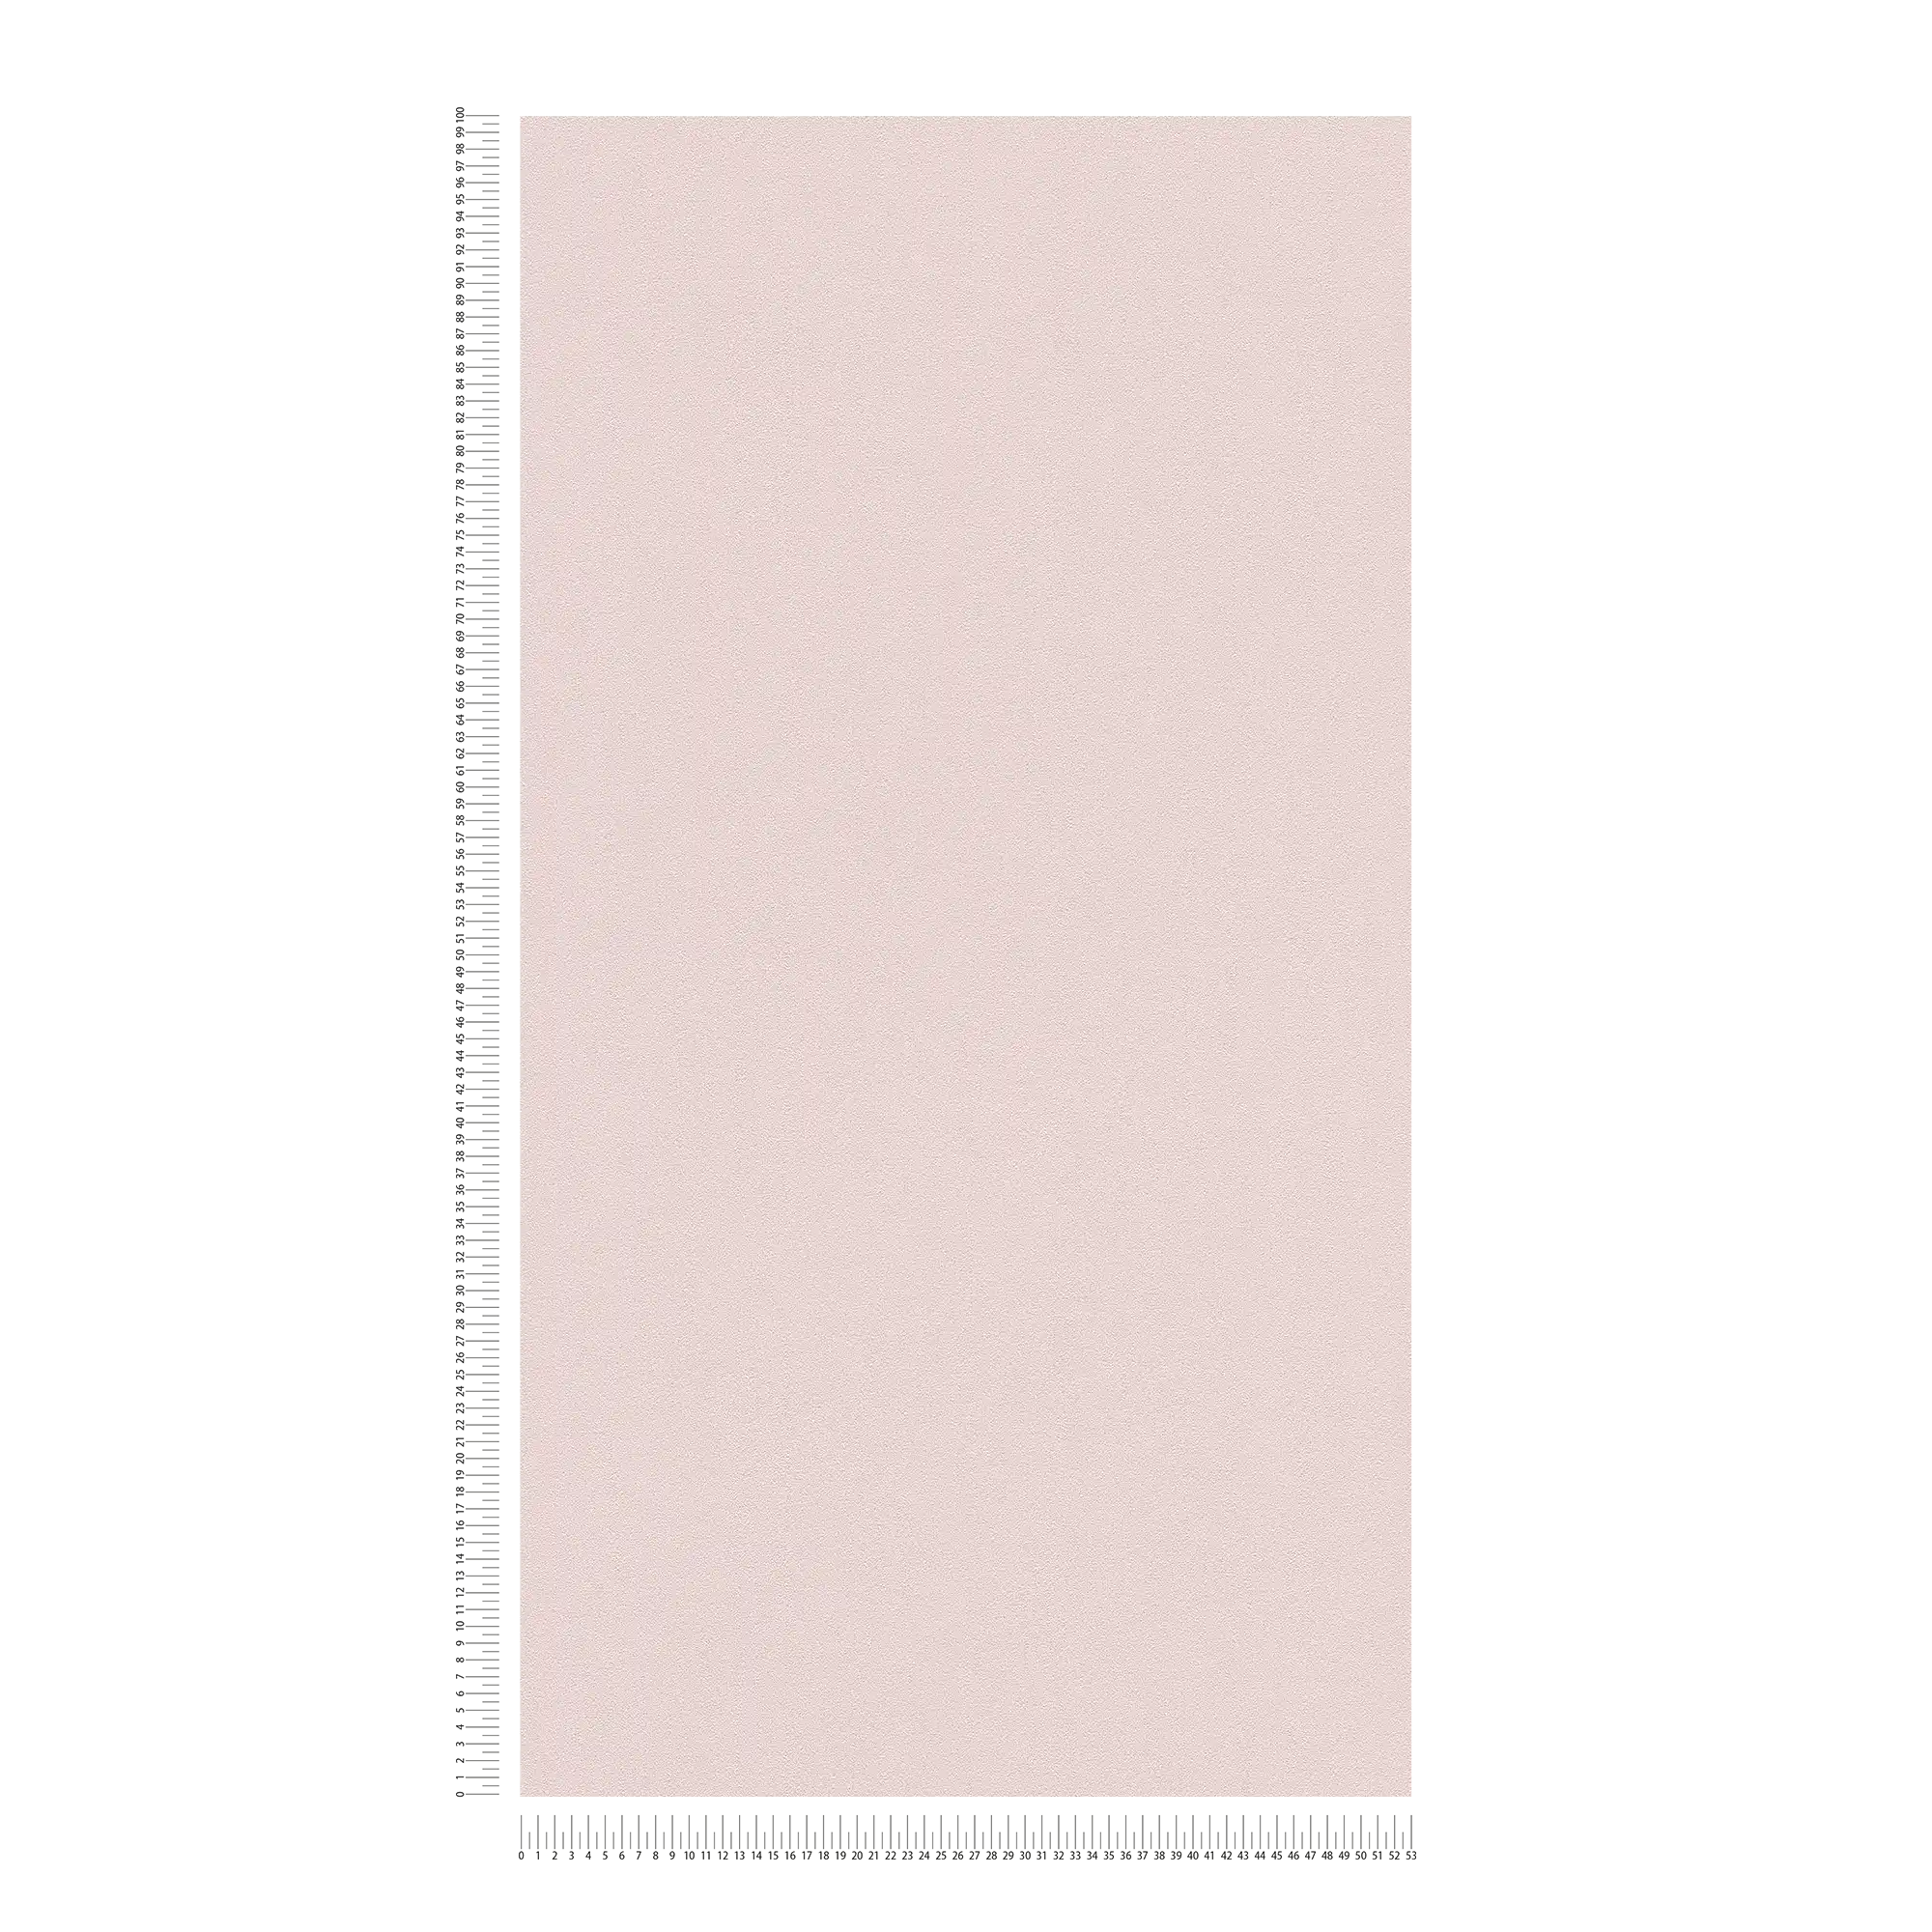             Plain wallpaper Karl LAGERFELD with structure embossing - purple
        